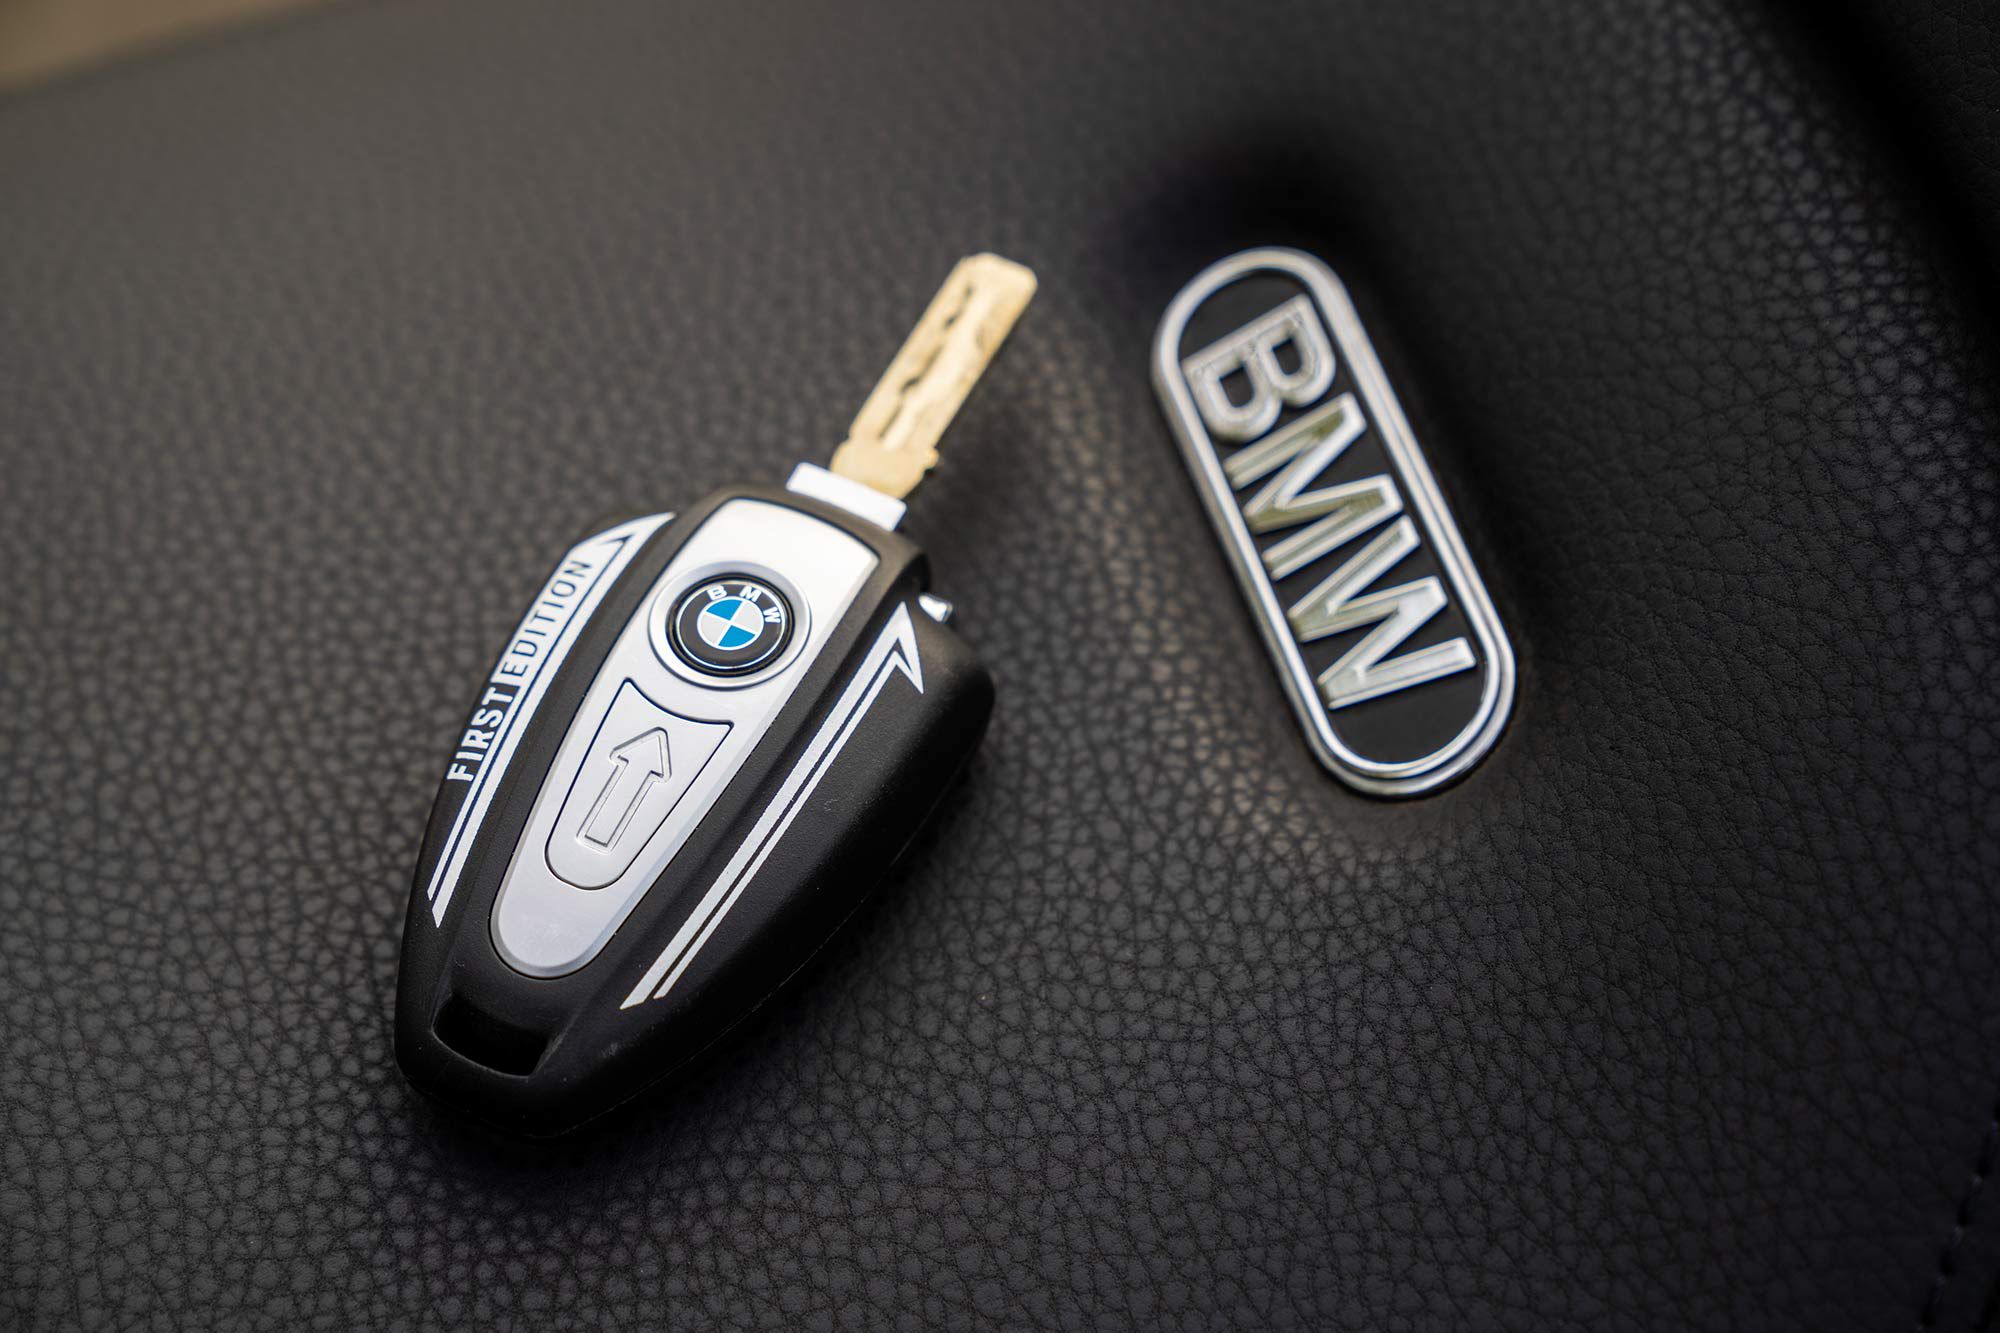 The R 18 Classic uses a proximity key fob with an integrated key so owners can lock the fuel tank if desired. The key is shaped like the fuel tank of the original 1936 R5.